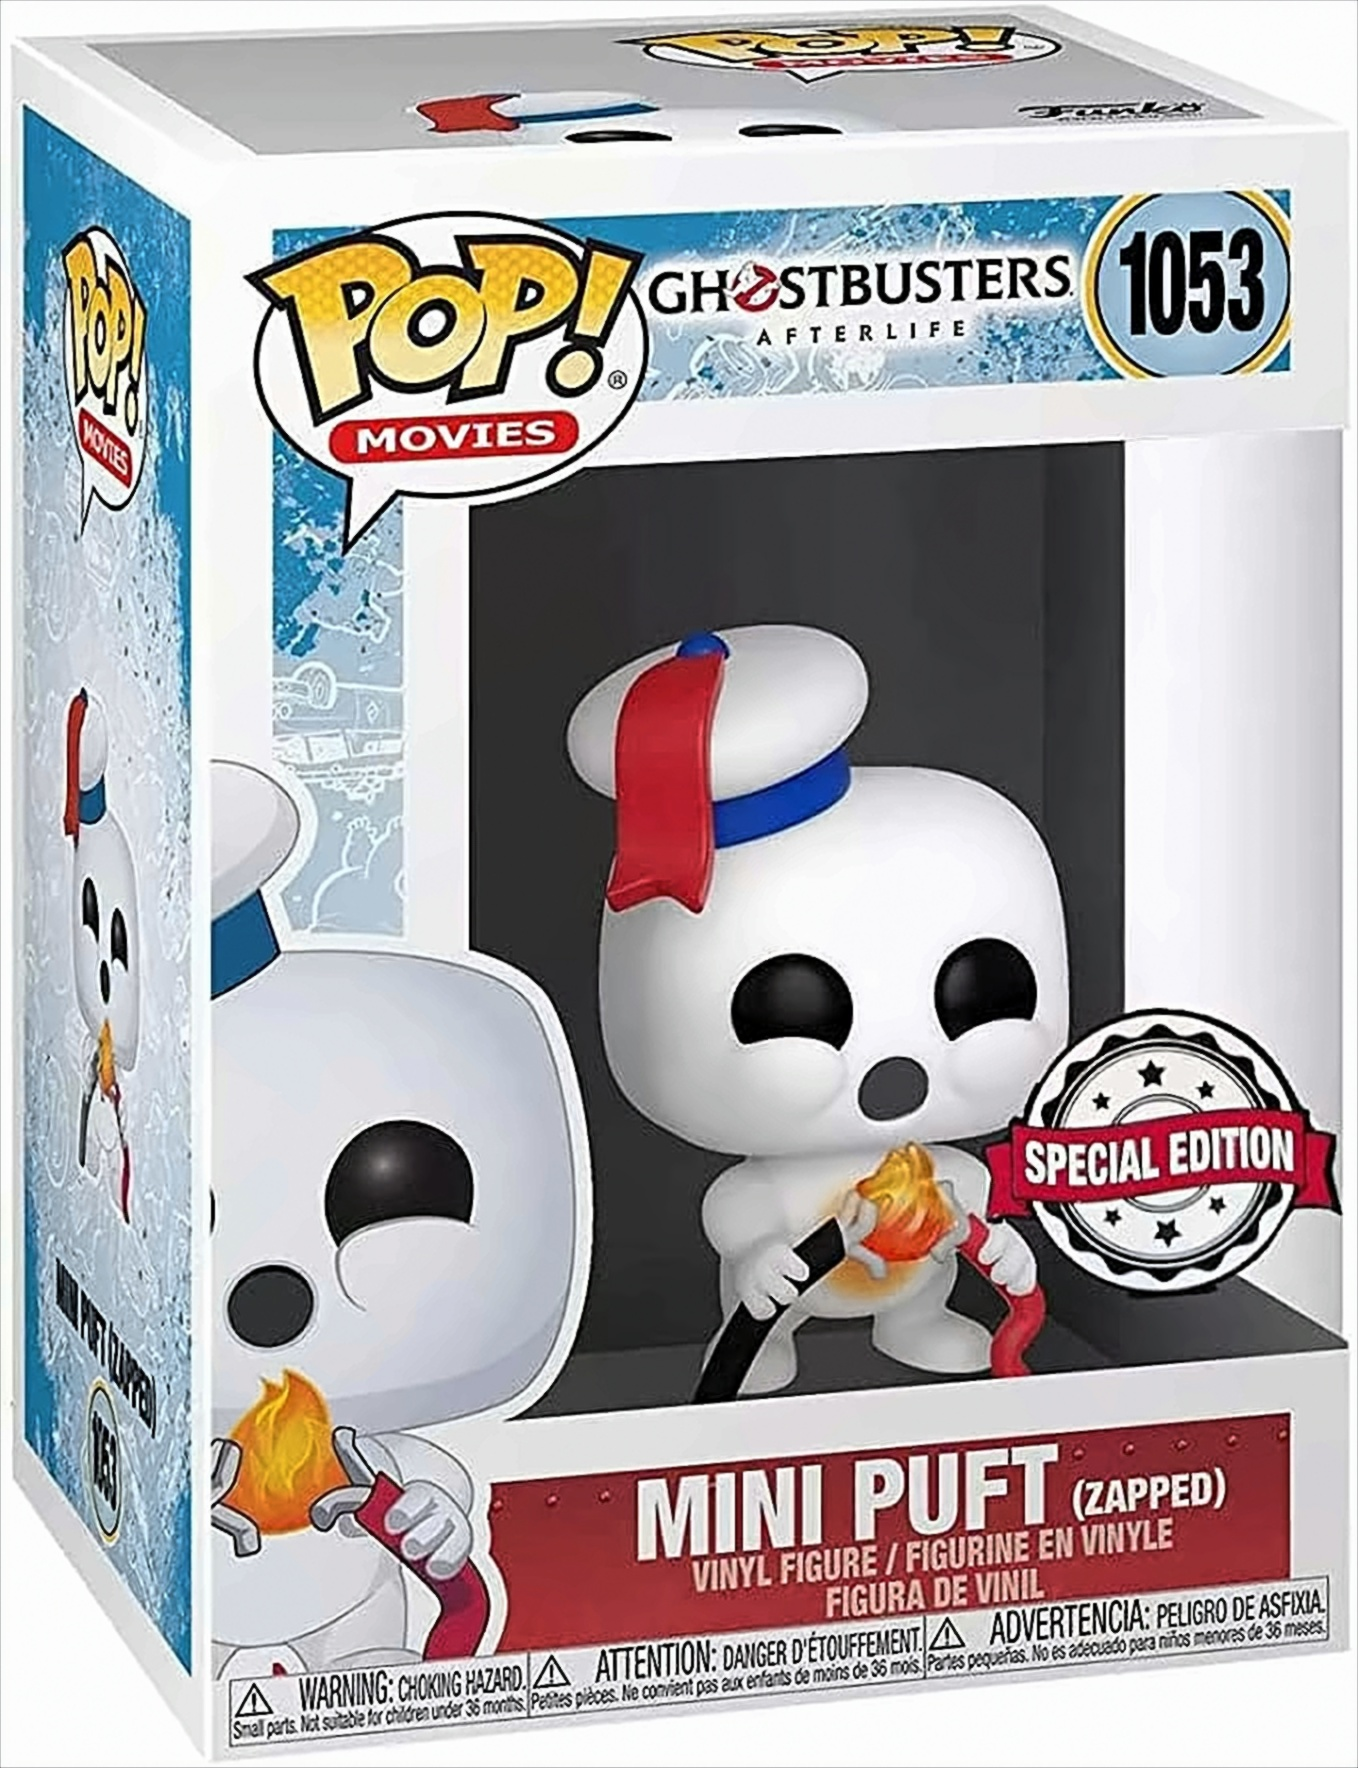 POP - Ghostbusters - Puft Mini (Zapped) Afterlife